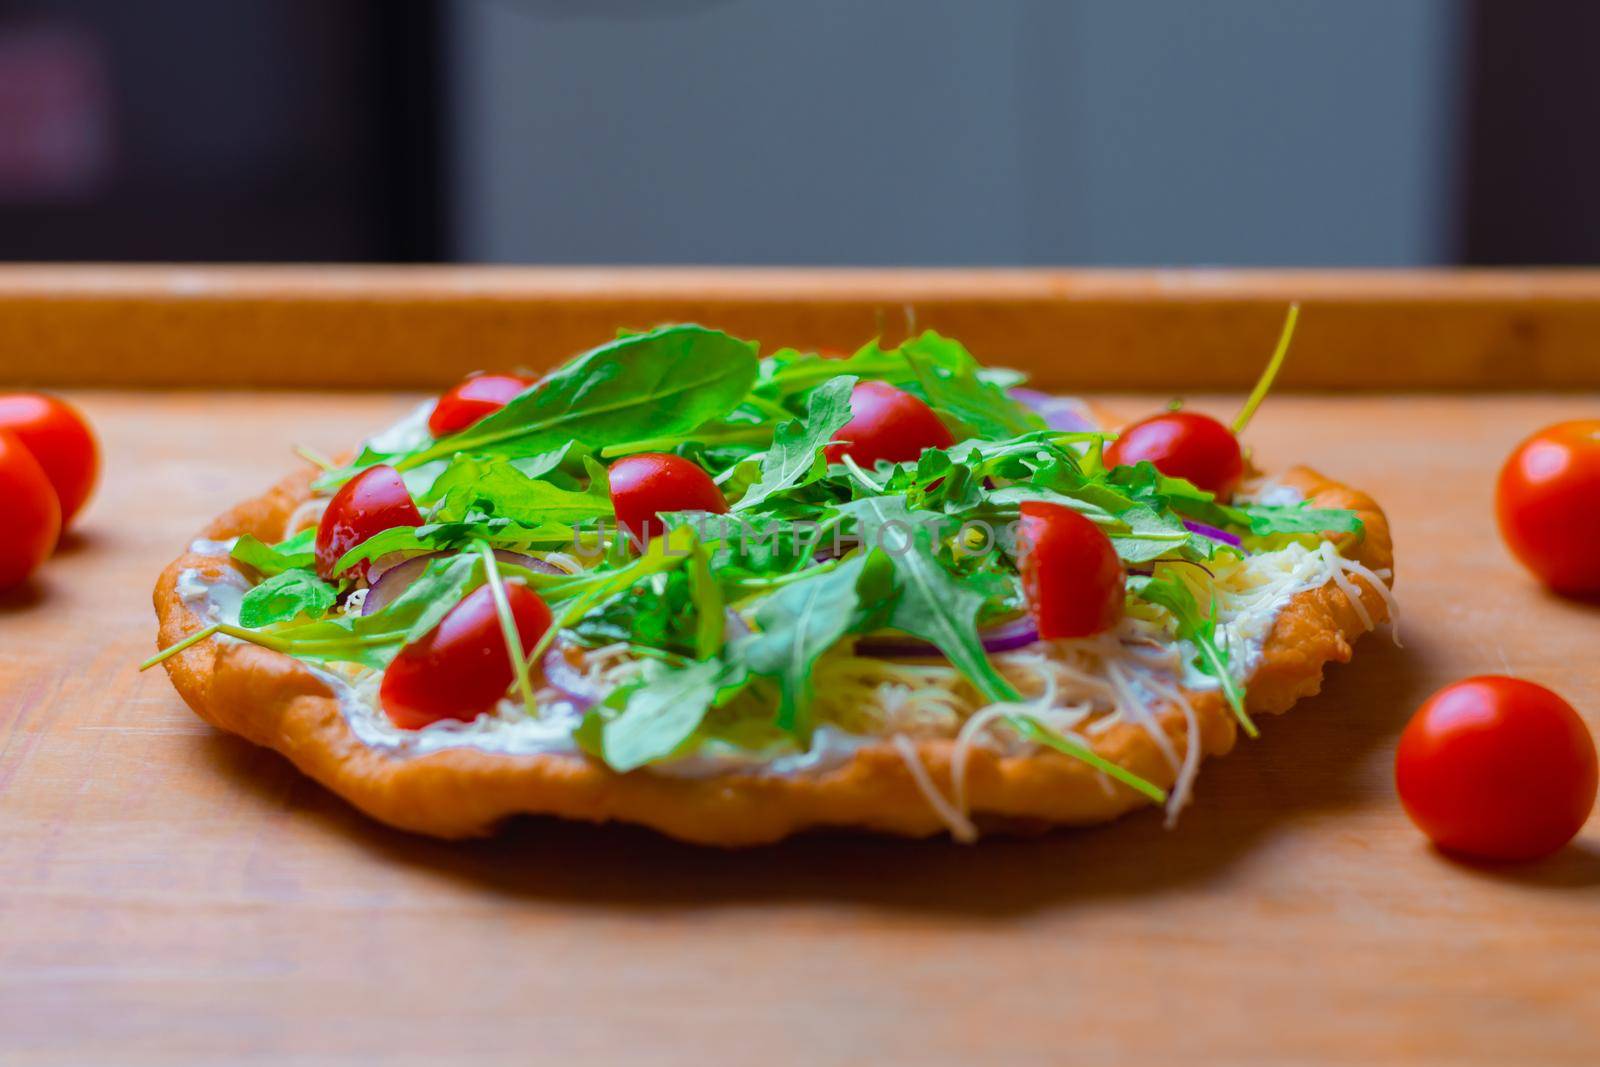 Tomato And Arugula Style Langos - a Hungarian specialty. High quality photo